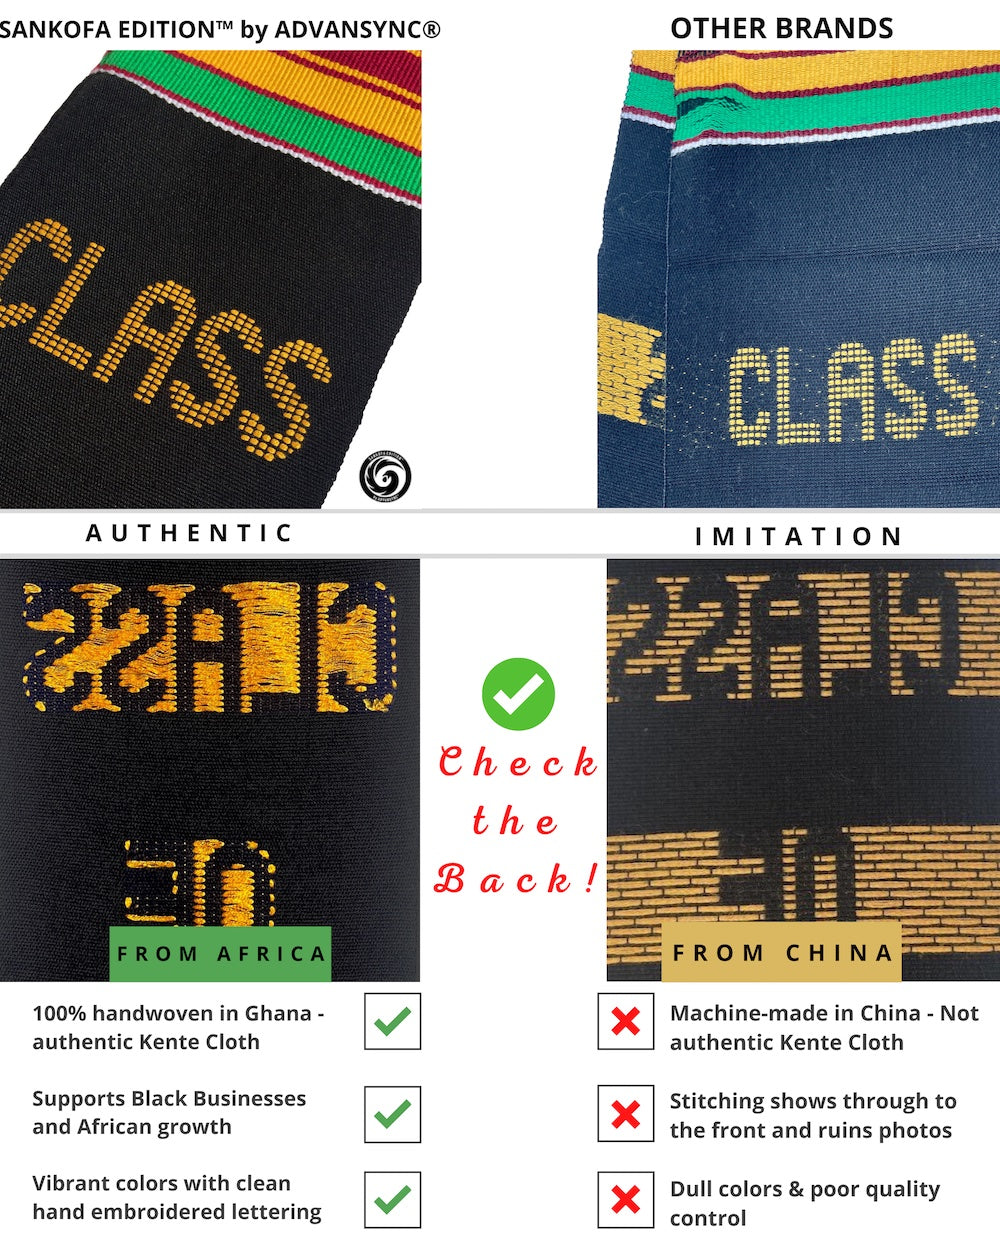 National Society of Black Engineers (NSBE) Class of 2024 Kente Graduation Stole